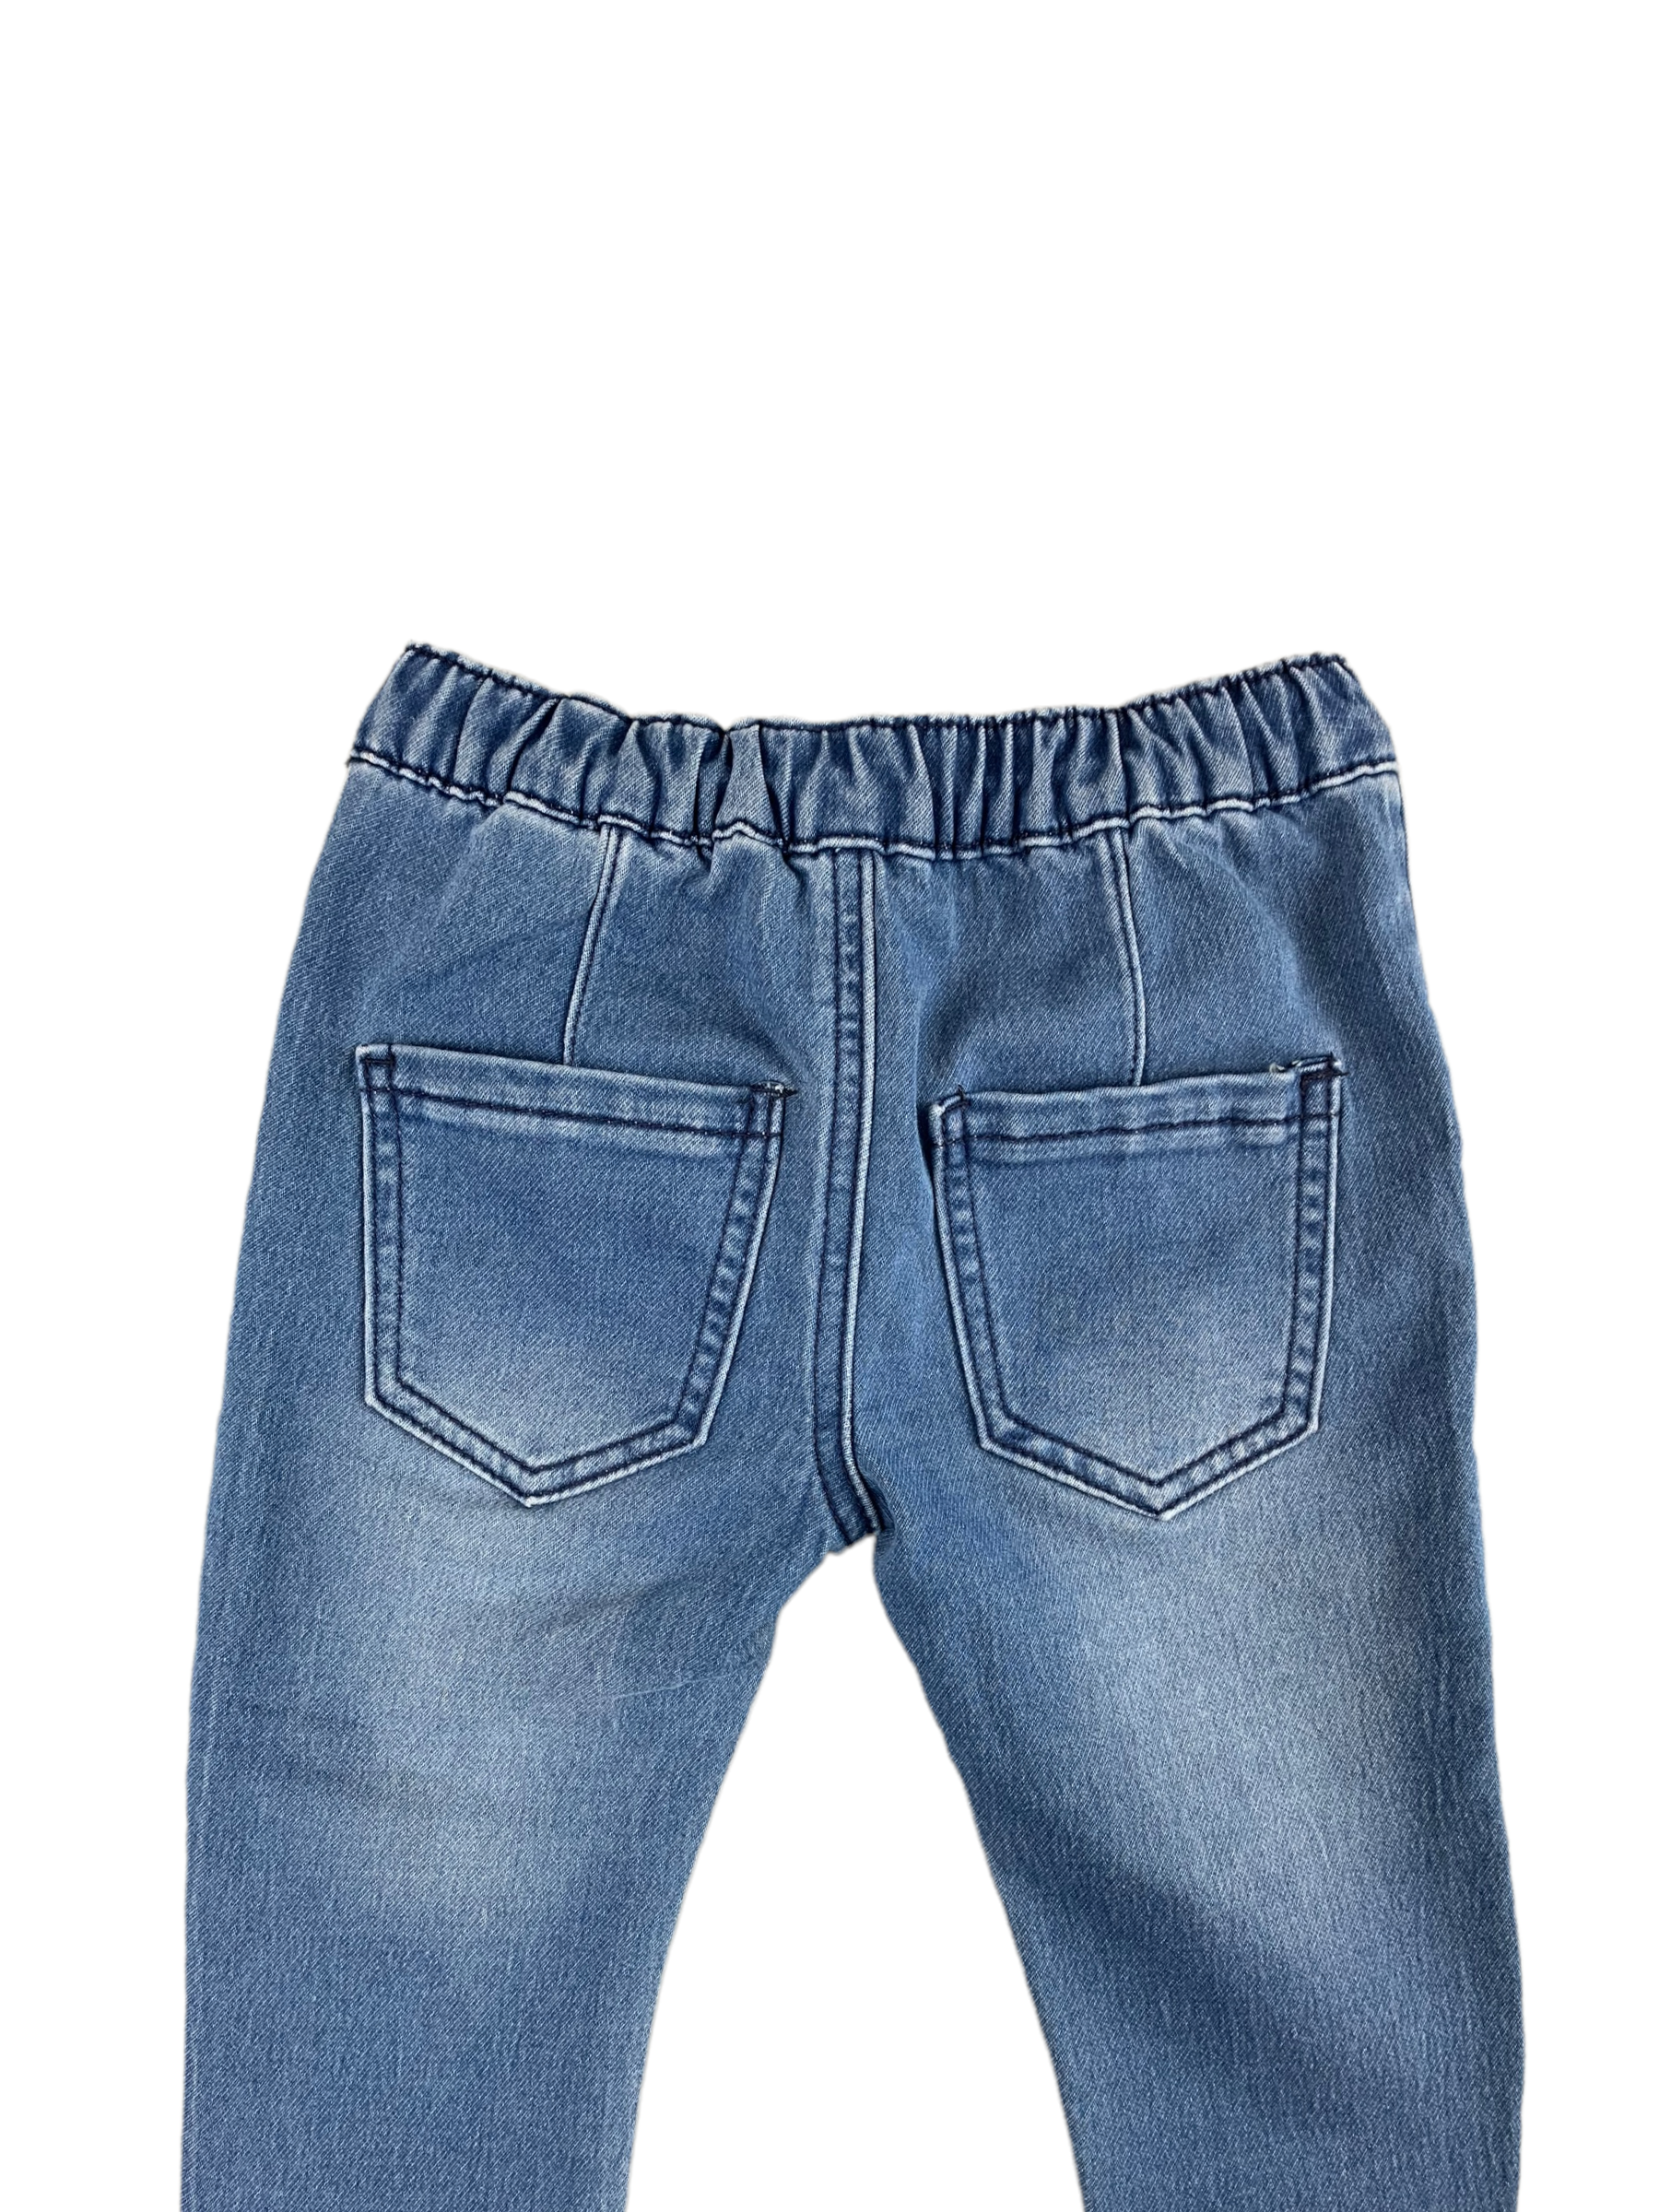 Pale blue denim joggers for girls 2 to 7 years